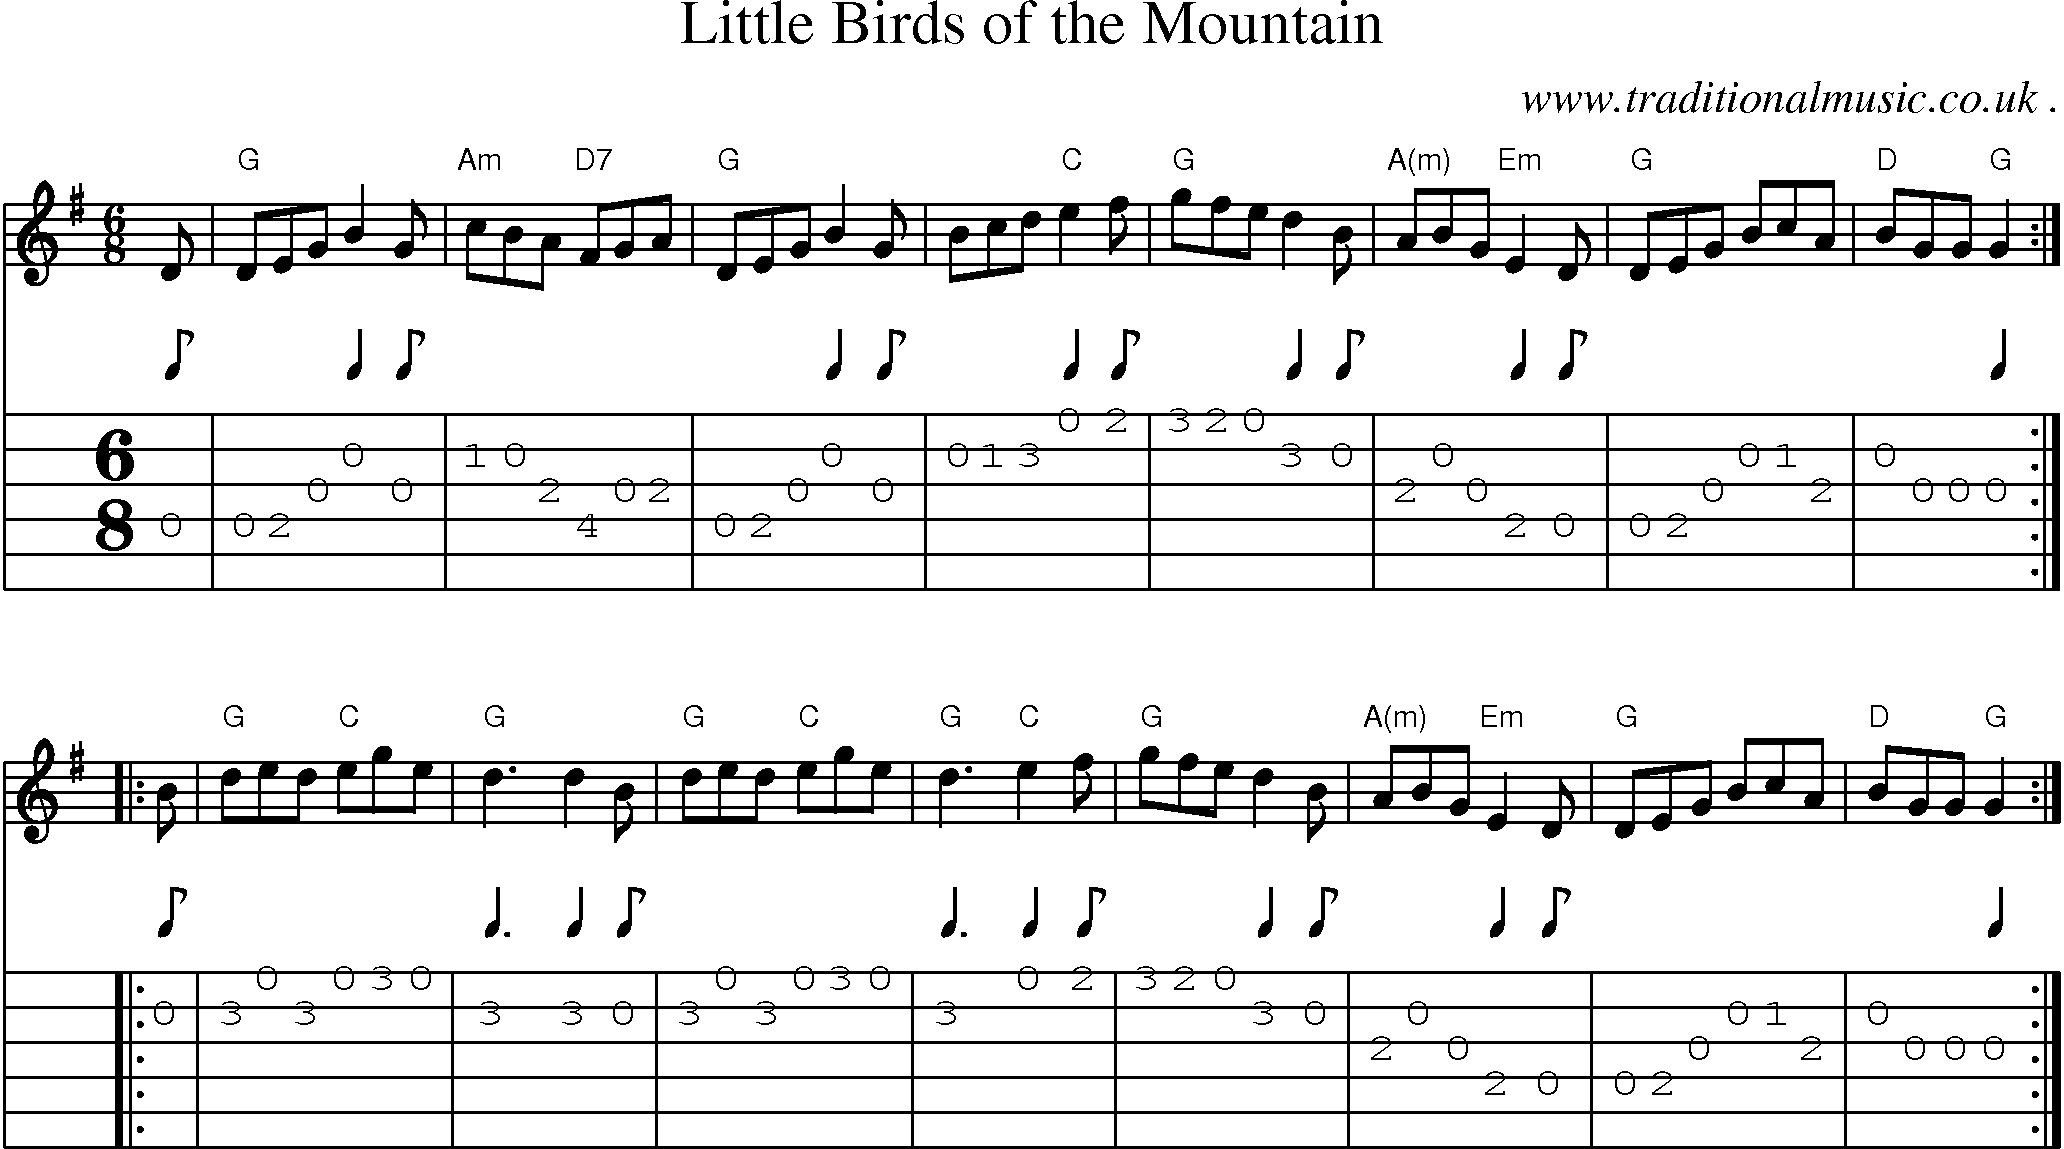 Sheet-music  score, Chords and Guitar Tabs for Little Birds Of The Mountain